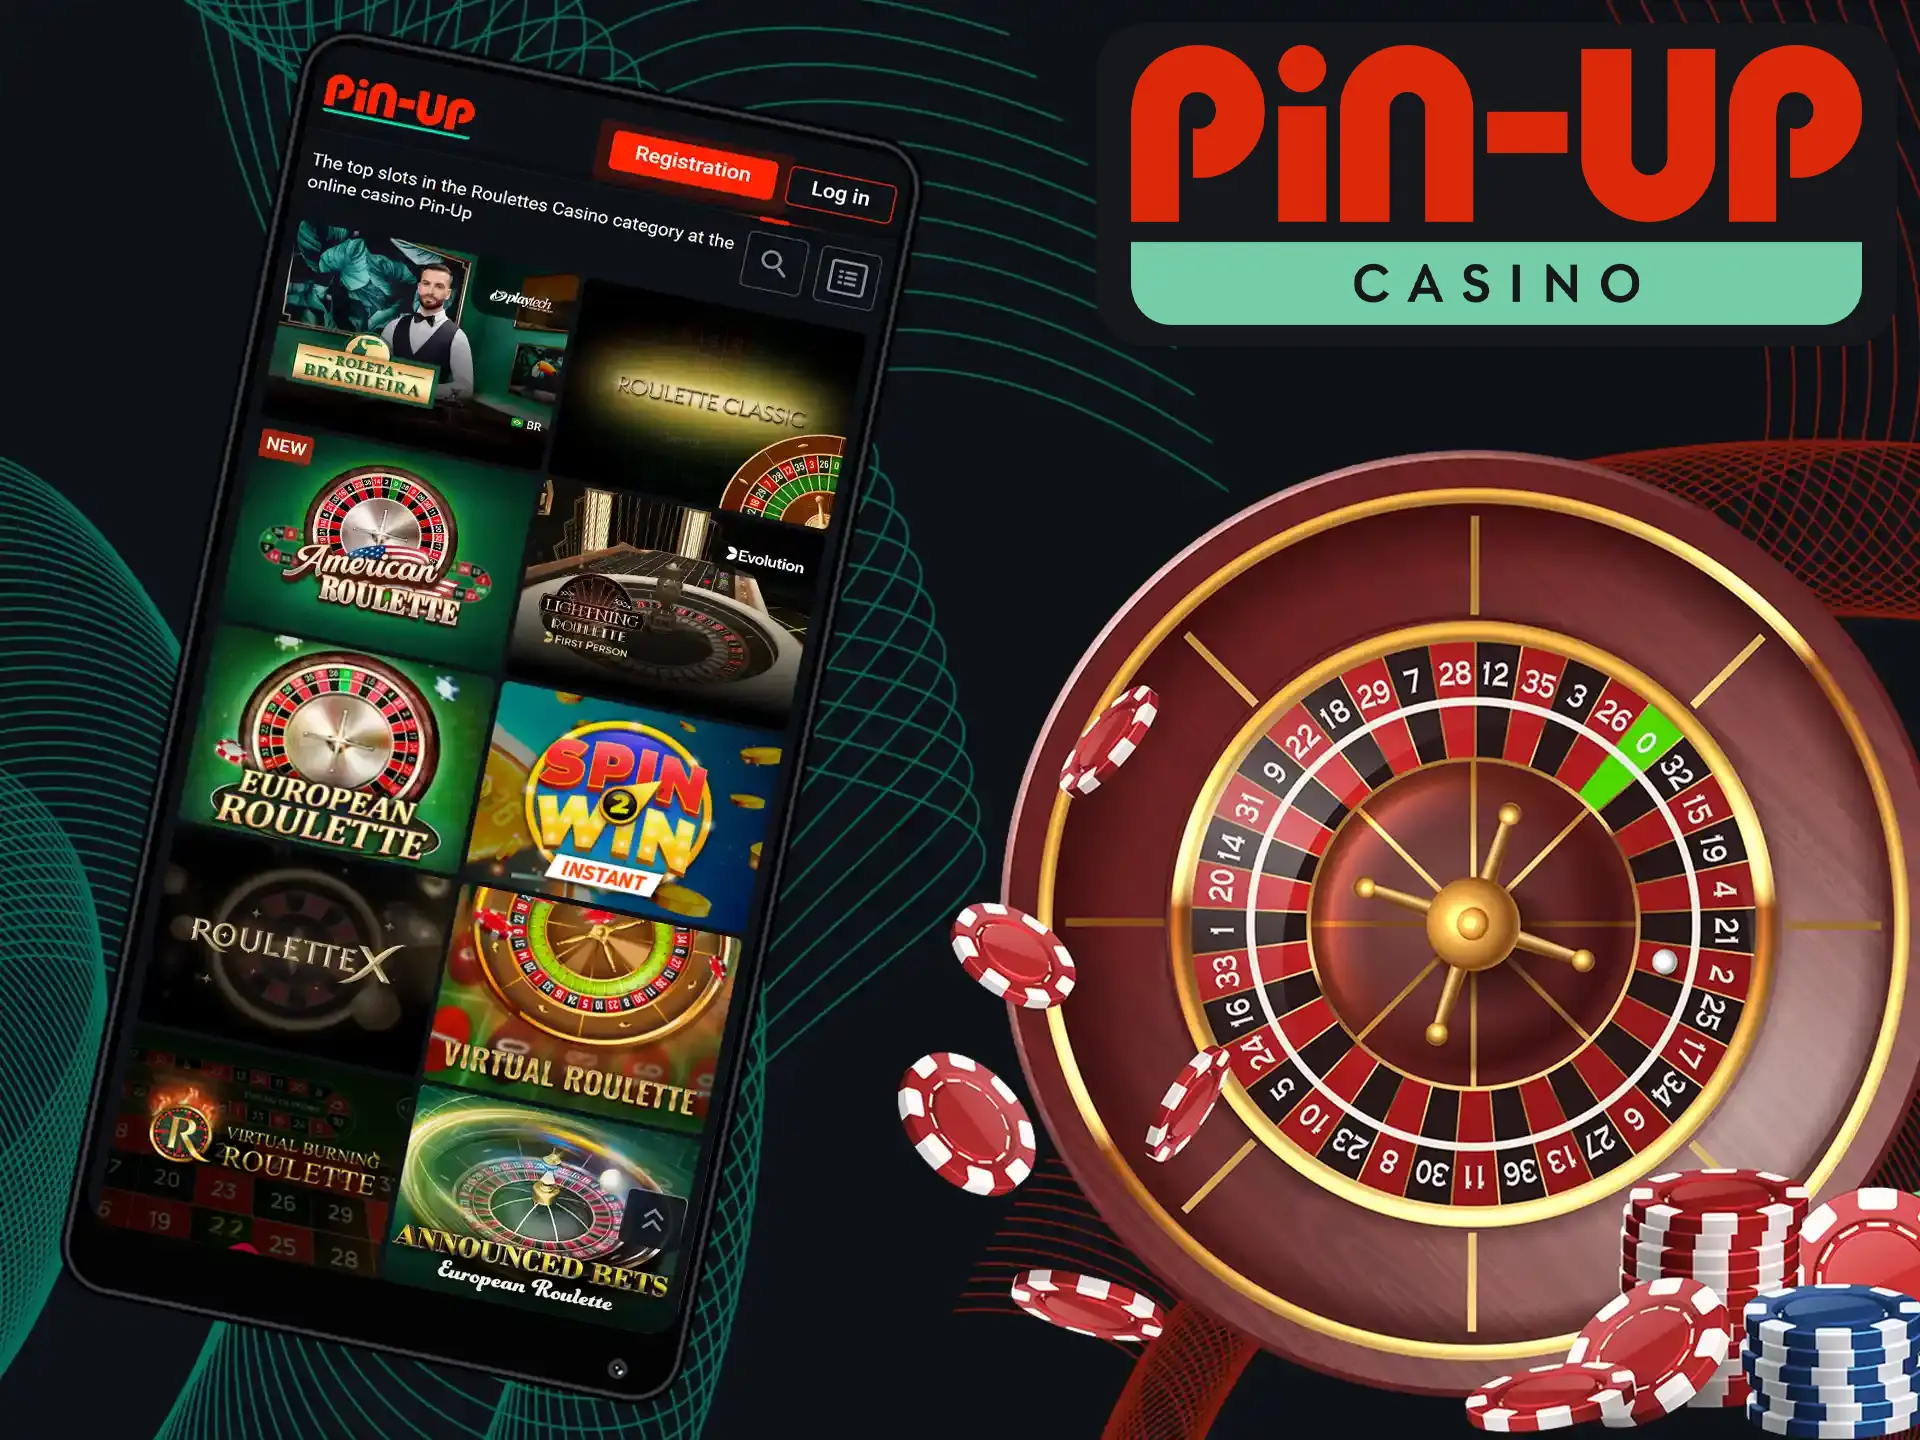 Roulette is very popular in the table games section of Pin-Up Casino.